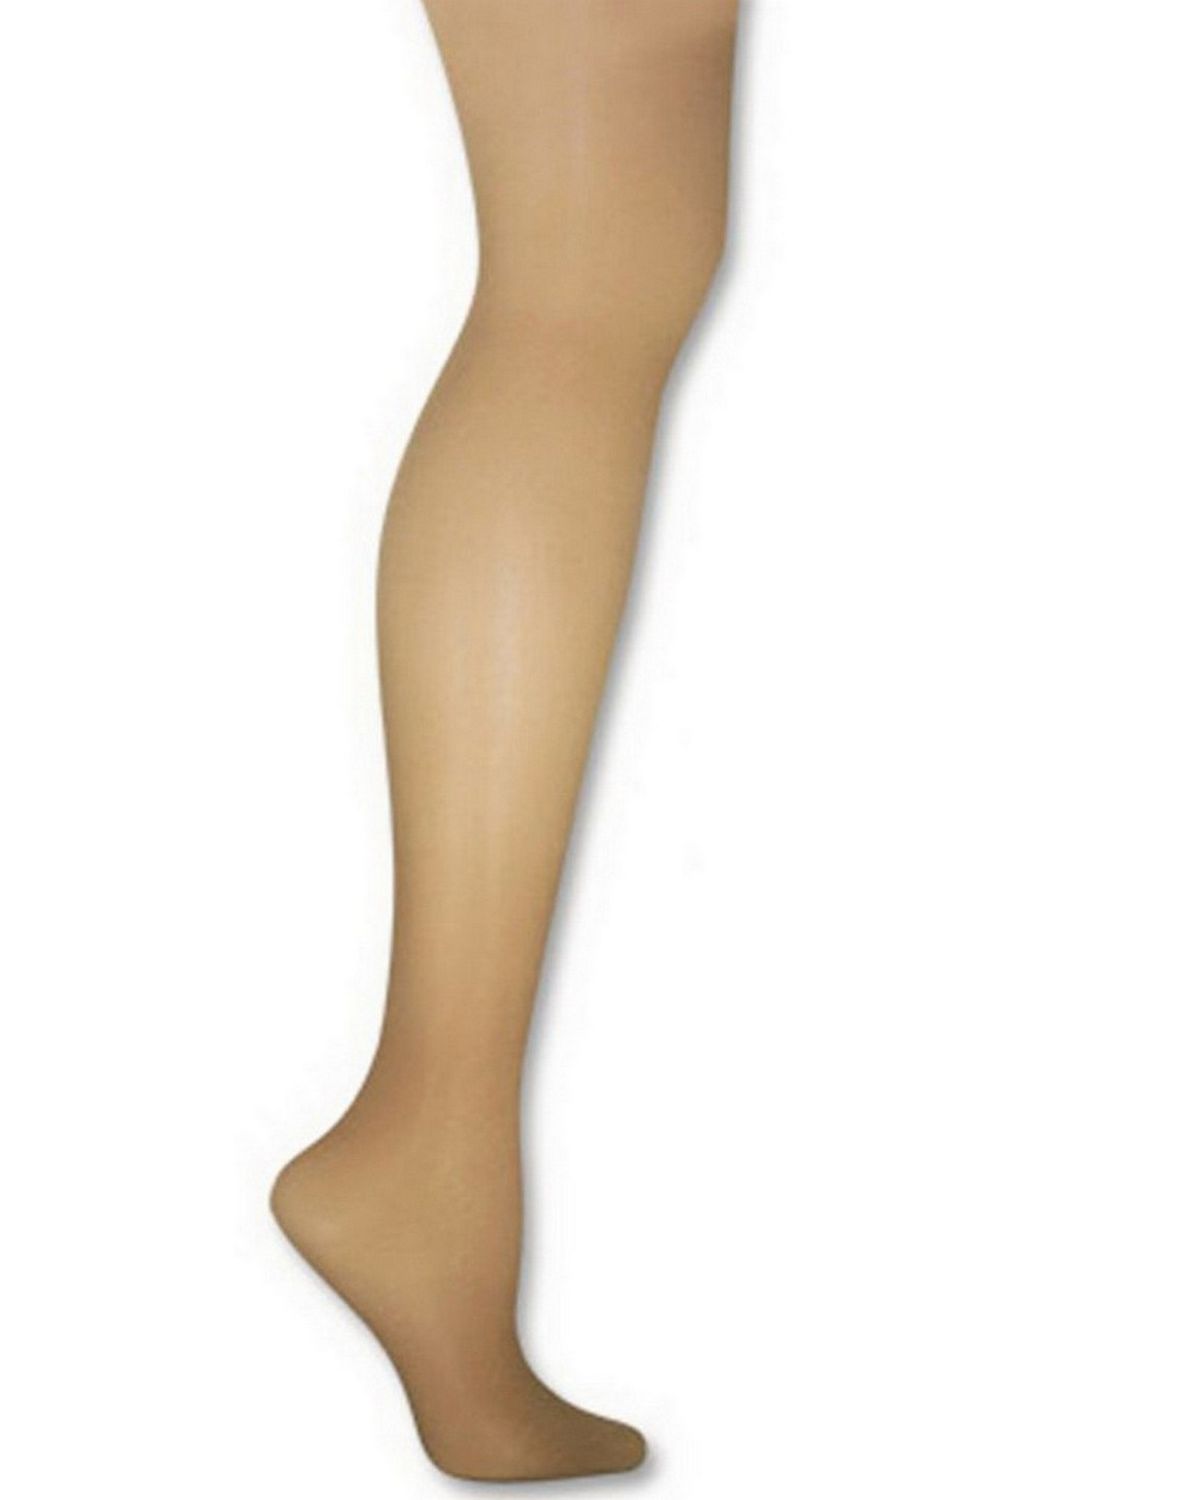 What's going on with Leggs Sheer Energy pantyhose? Why are they